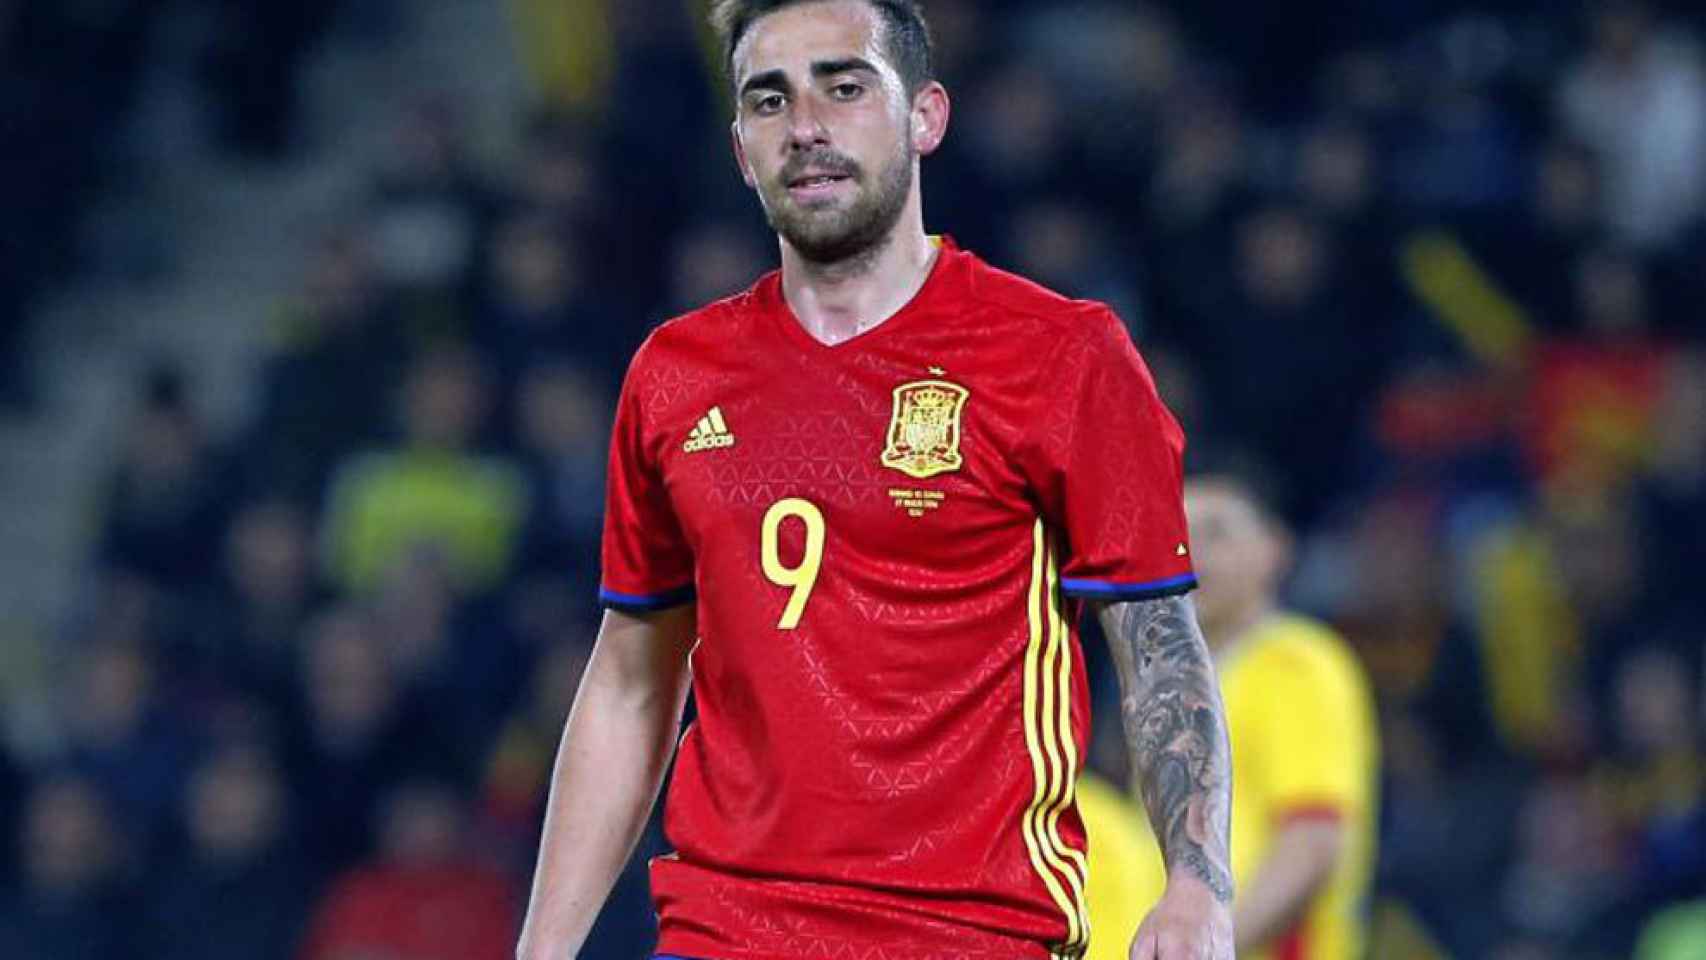 Paco Alcacer.